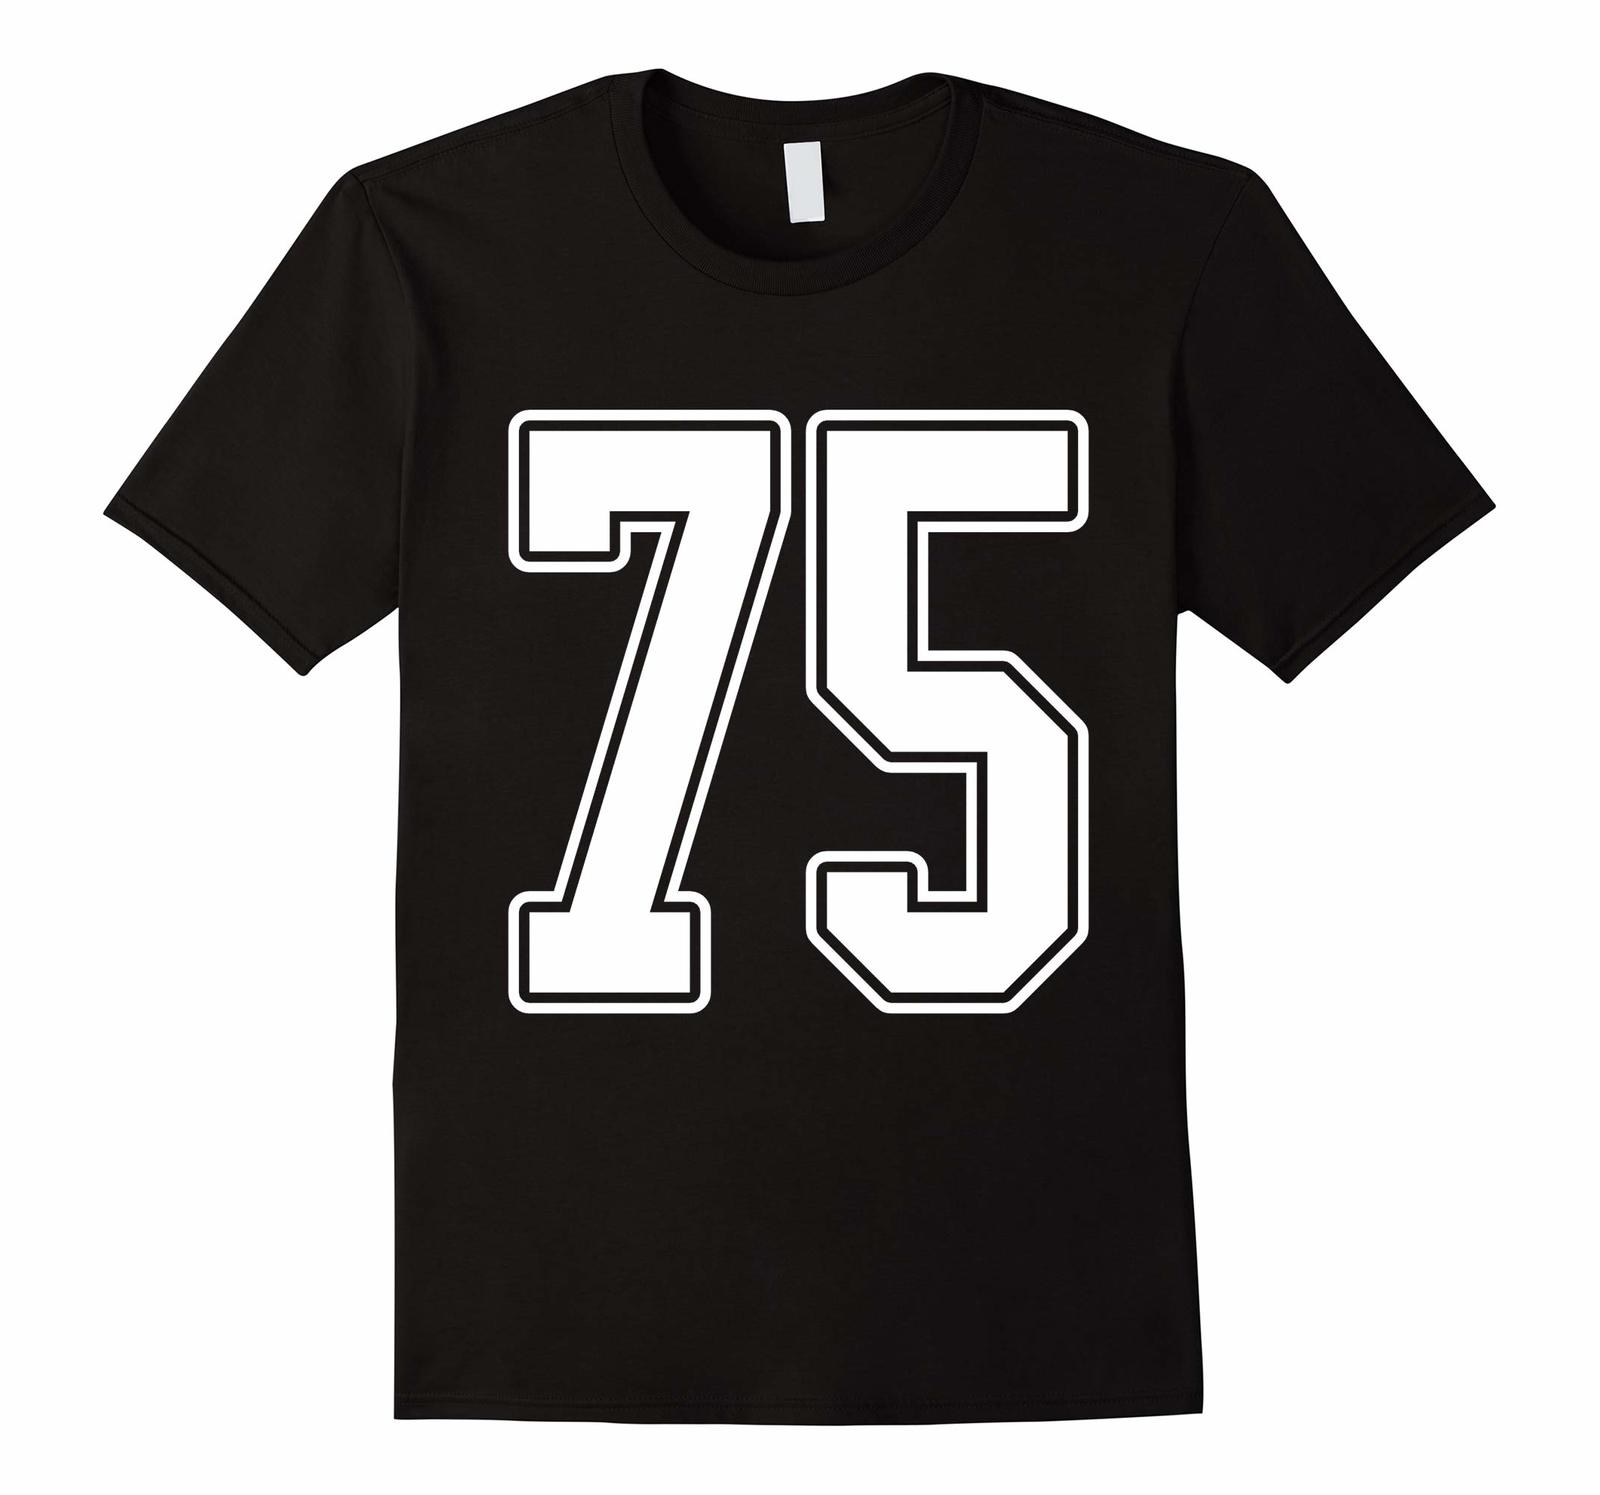 New Tee - #75 White Outline Number 75 Sports Fan Jersey Style T-Tee Men ...